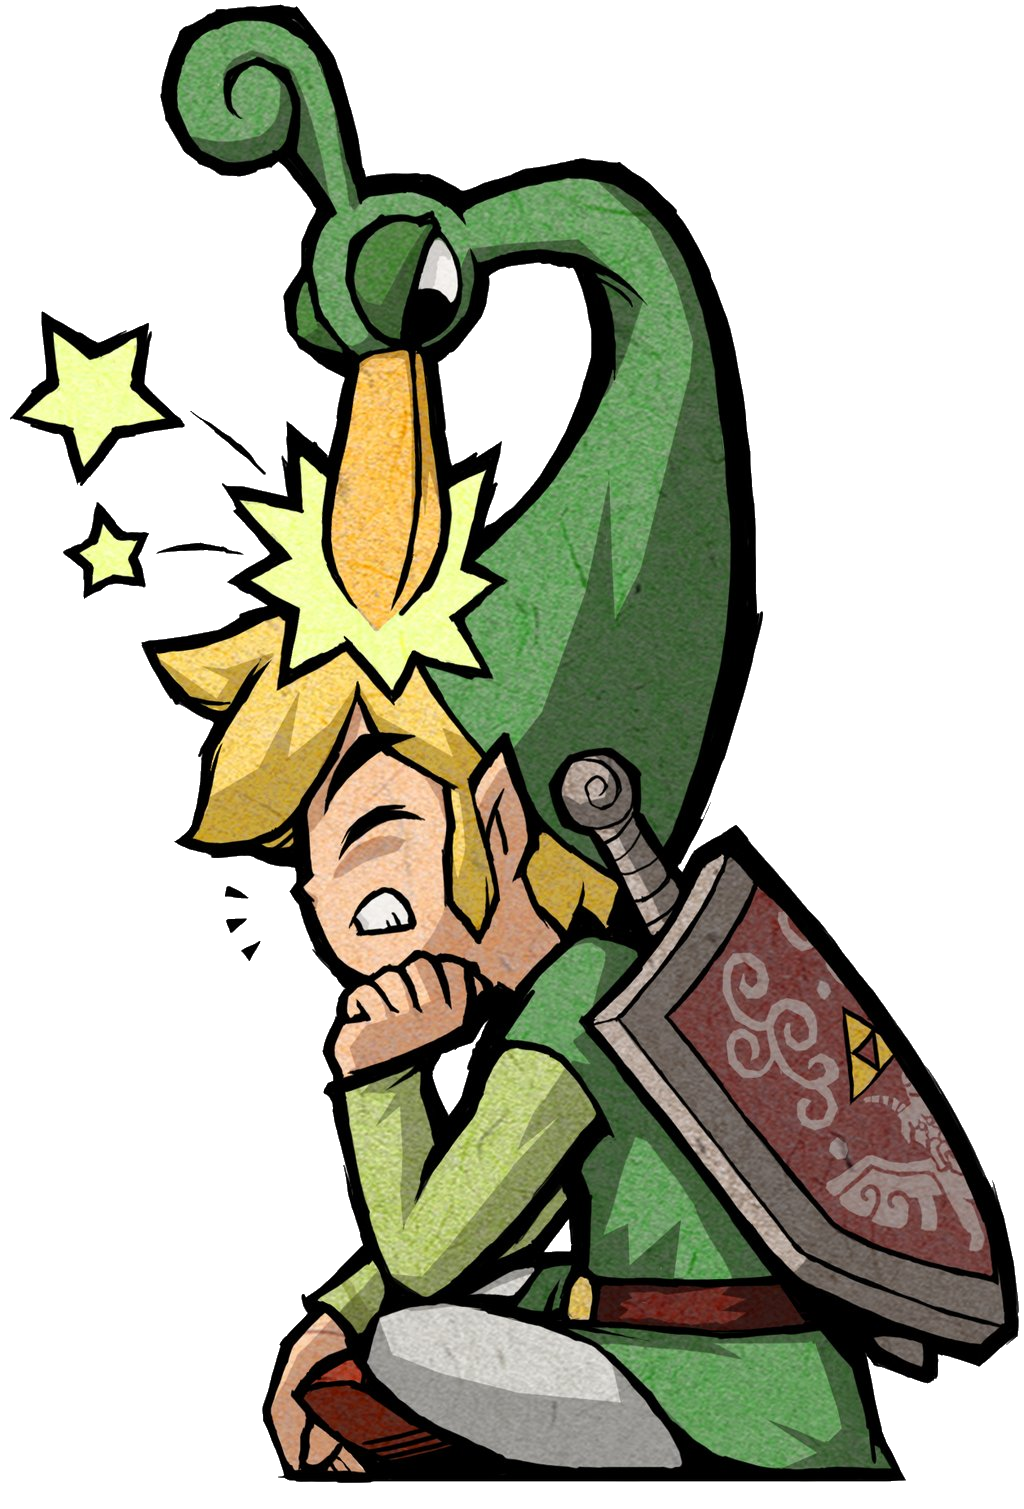 The Legend Of Zelda: The Minish Cap Pics, Video Game Collection